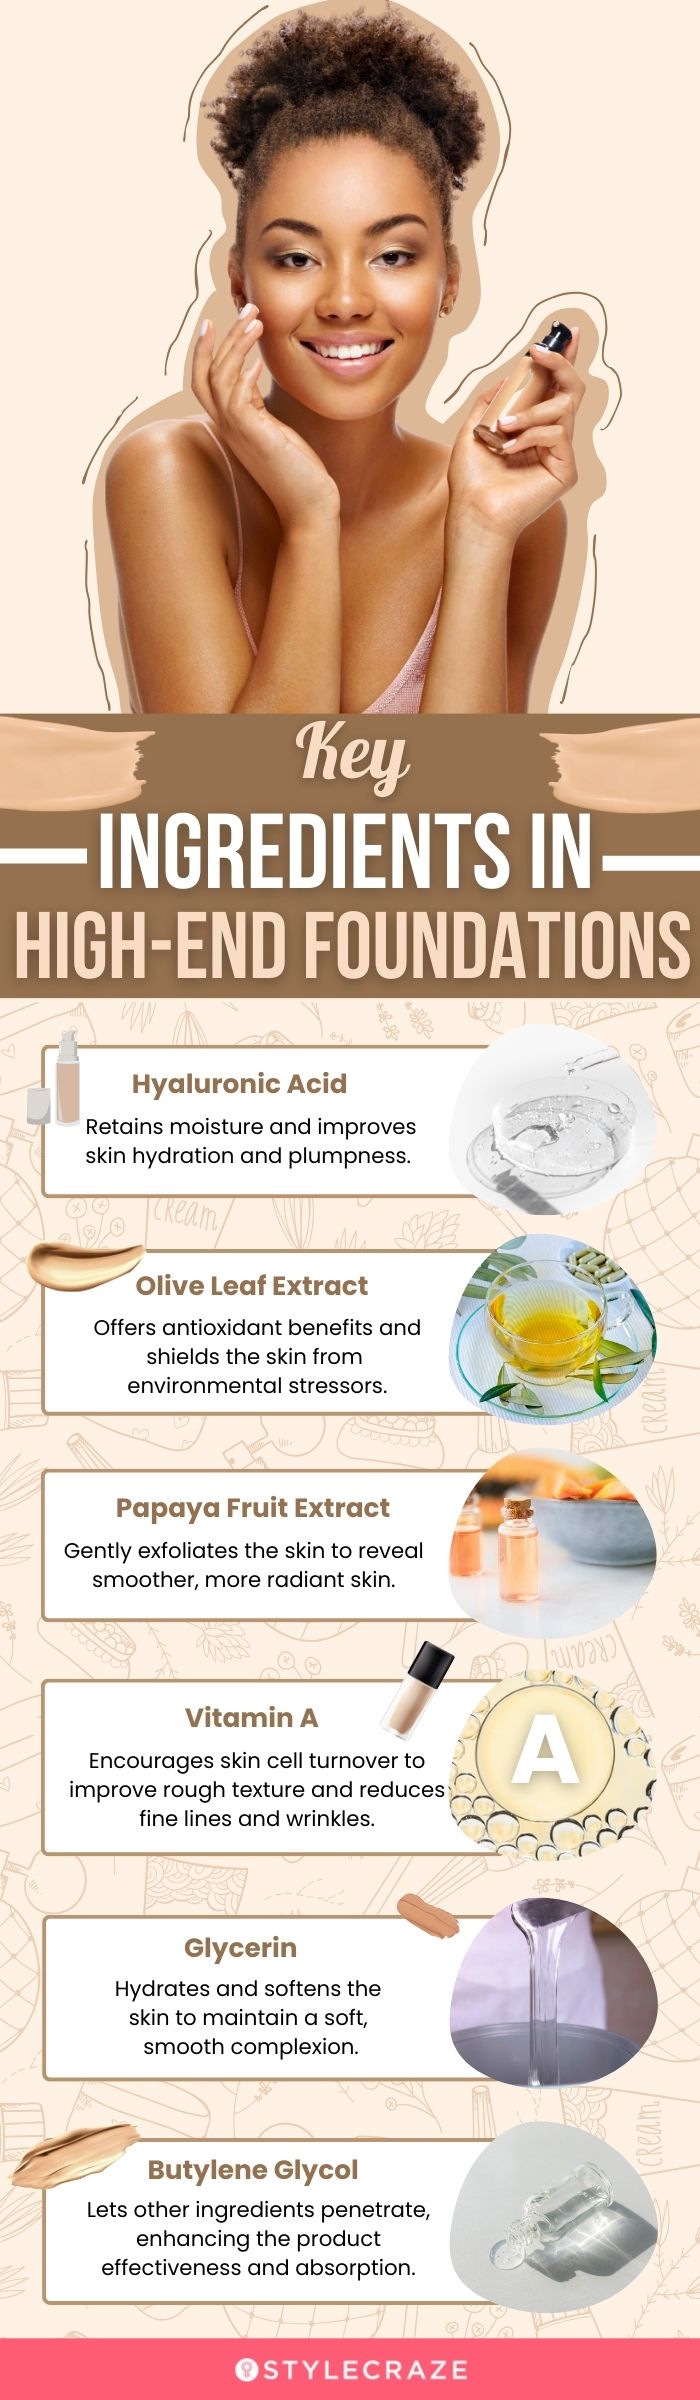 Key Ingredients In High-End Foundations (infographic)